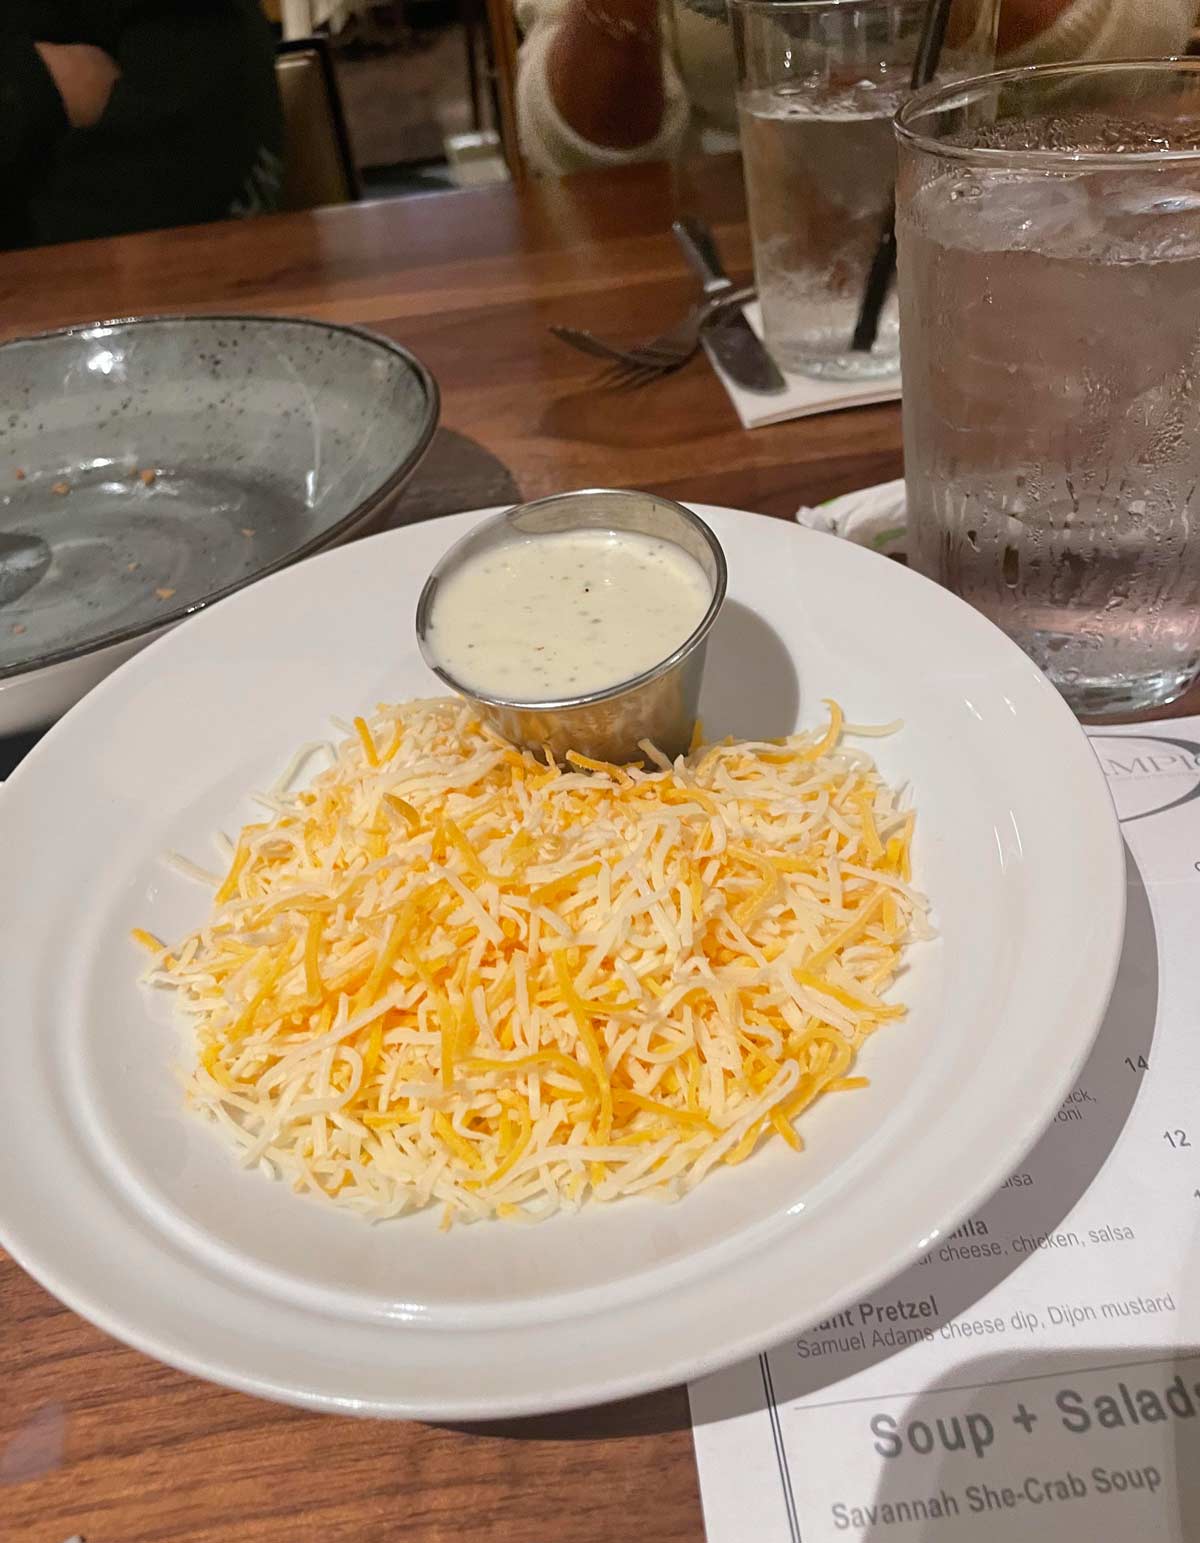 My dinner companion asked for “A salad, but just cheese and ranch”